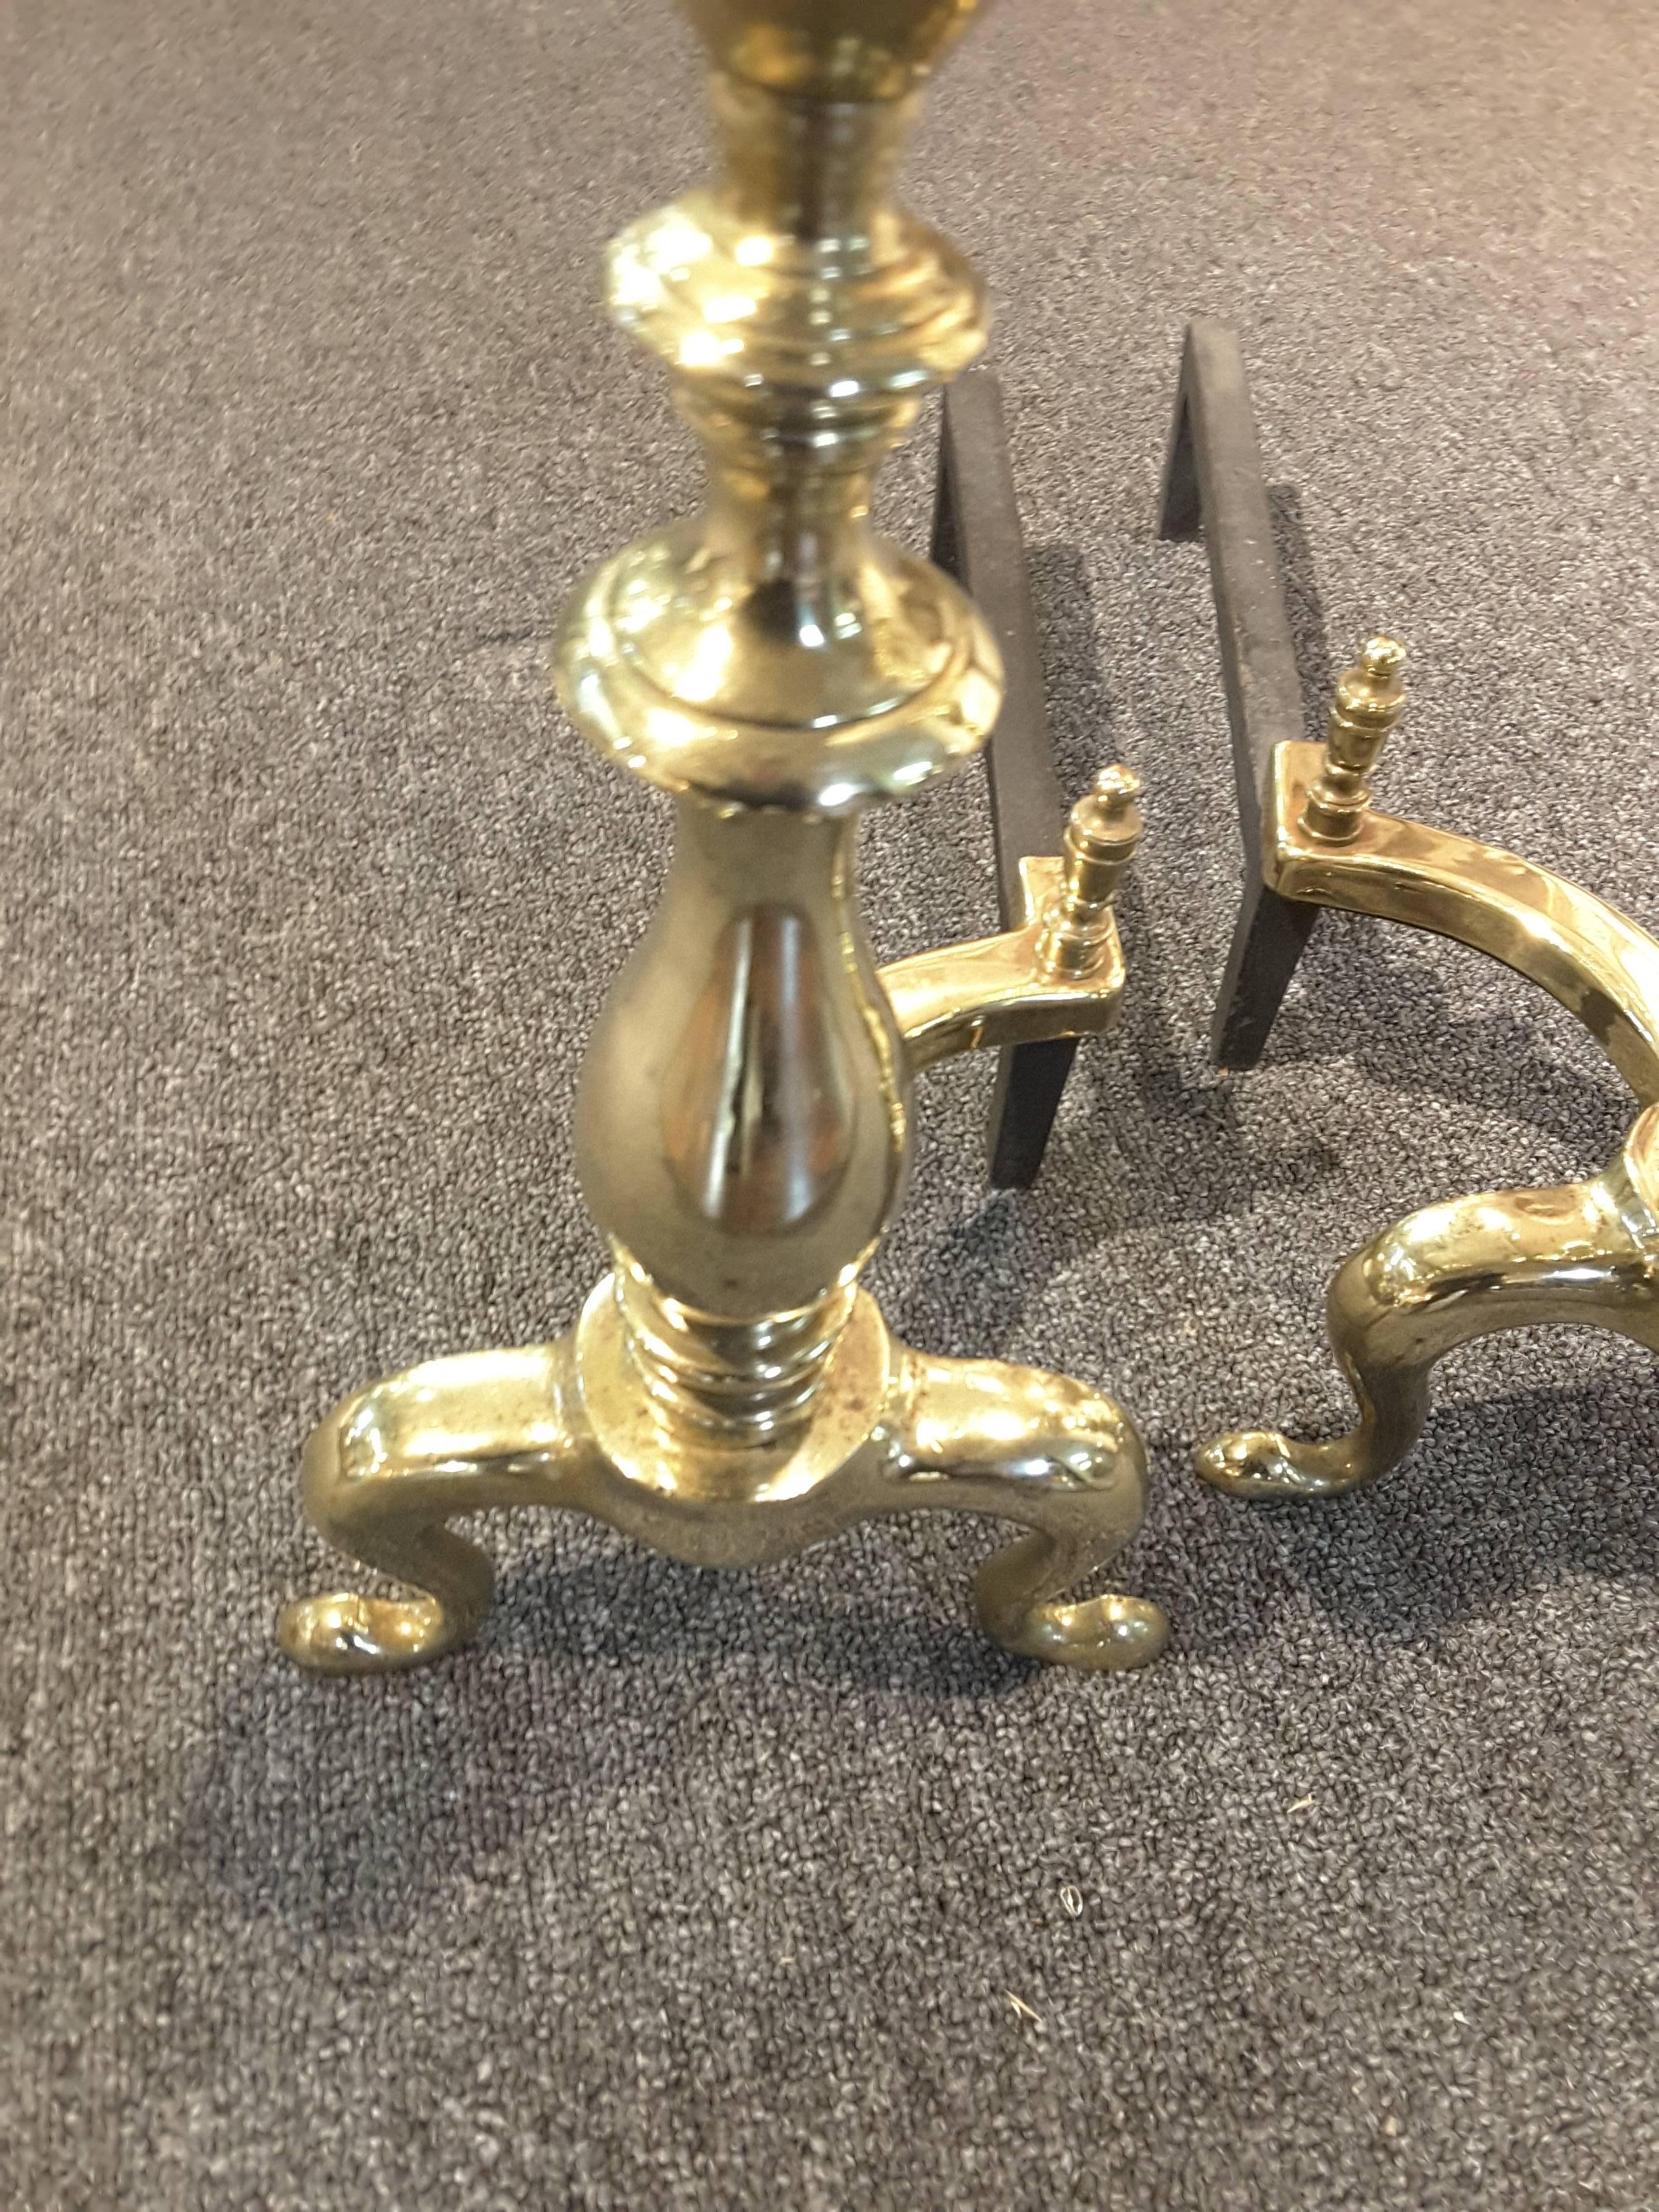 Pair of late 19th century solid brass andirons with log stops on a cabriole leg to a pad foot. Cast Iron back inserts. The andirons measure 21